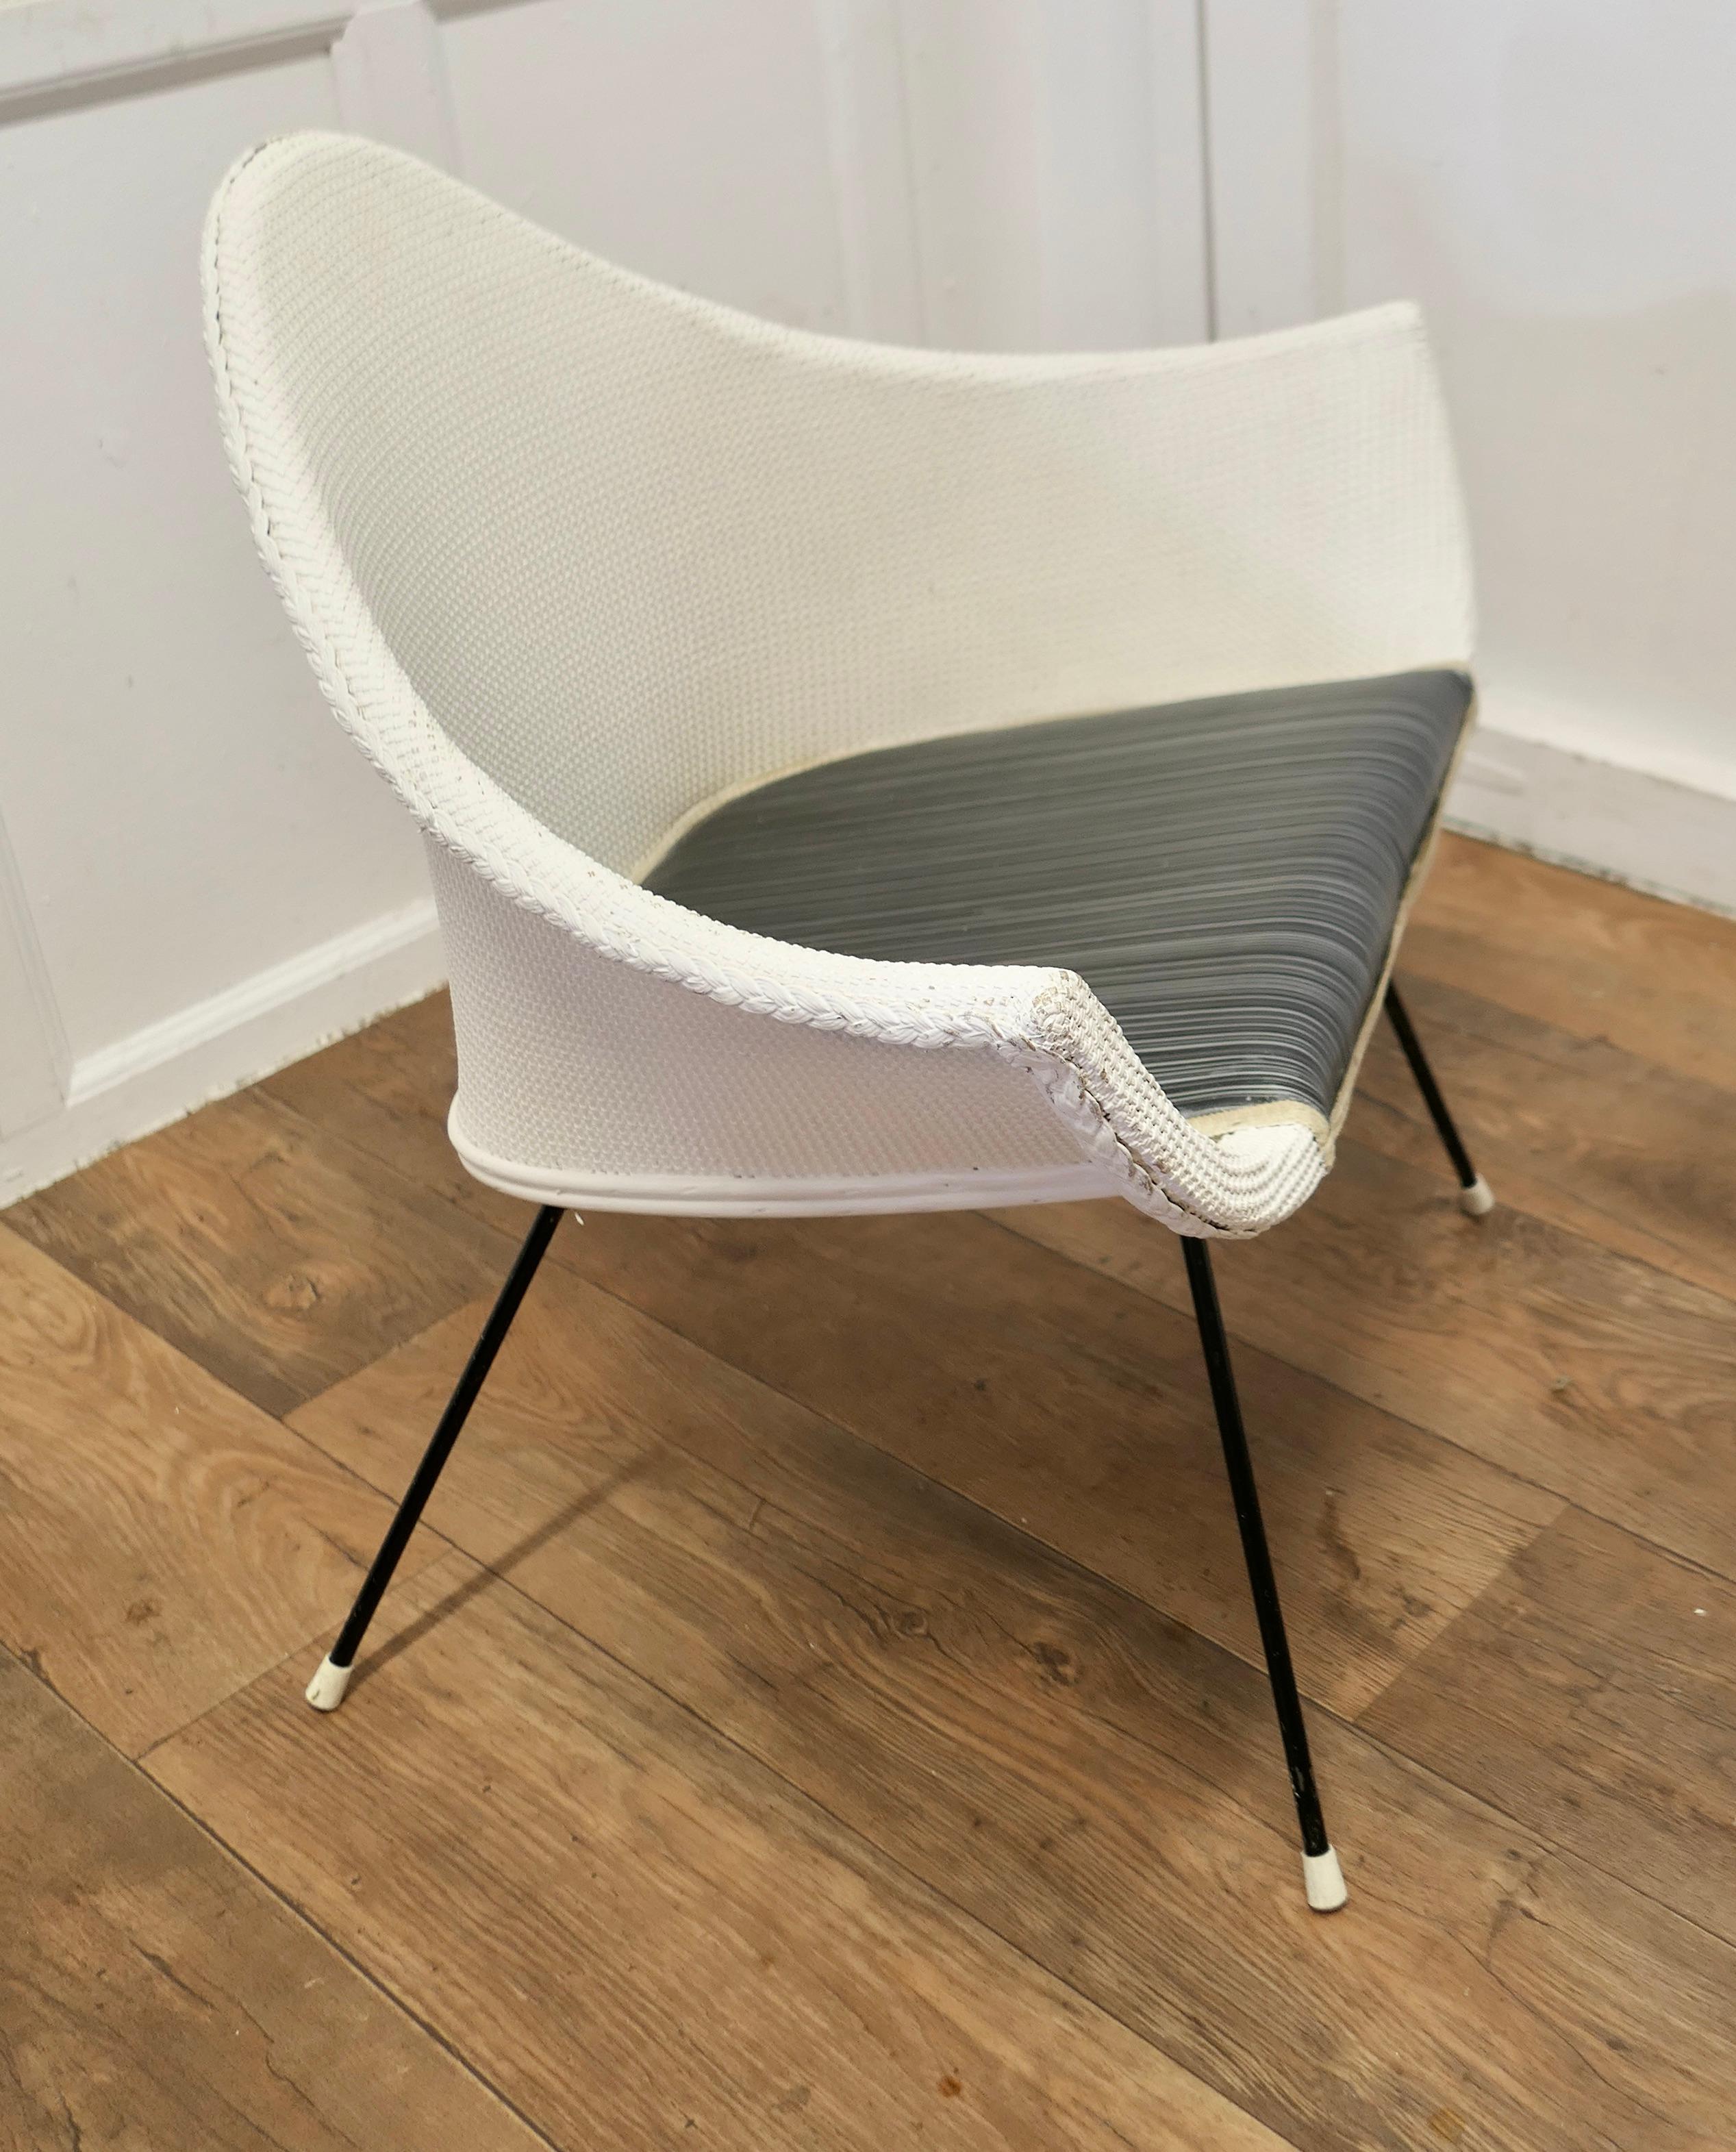 Lloyd Loom 1960s “Stingray” Retro Arm Chair   A Quirky statement piece of its ti In Good Condition For Sale In Chillerton, Isle of Wight